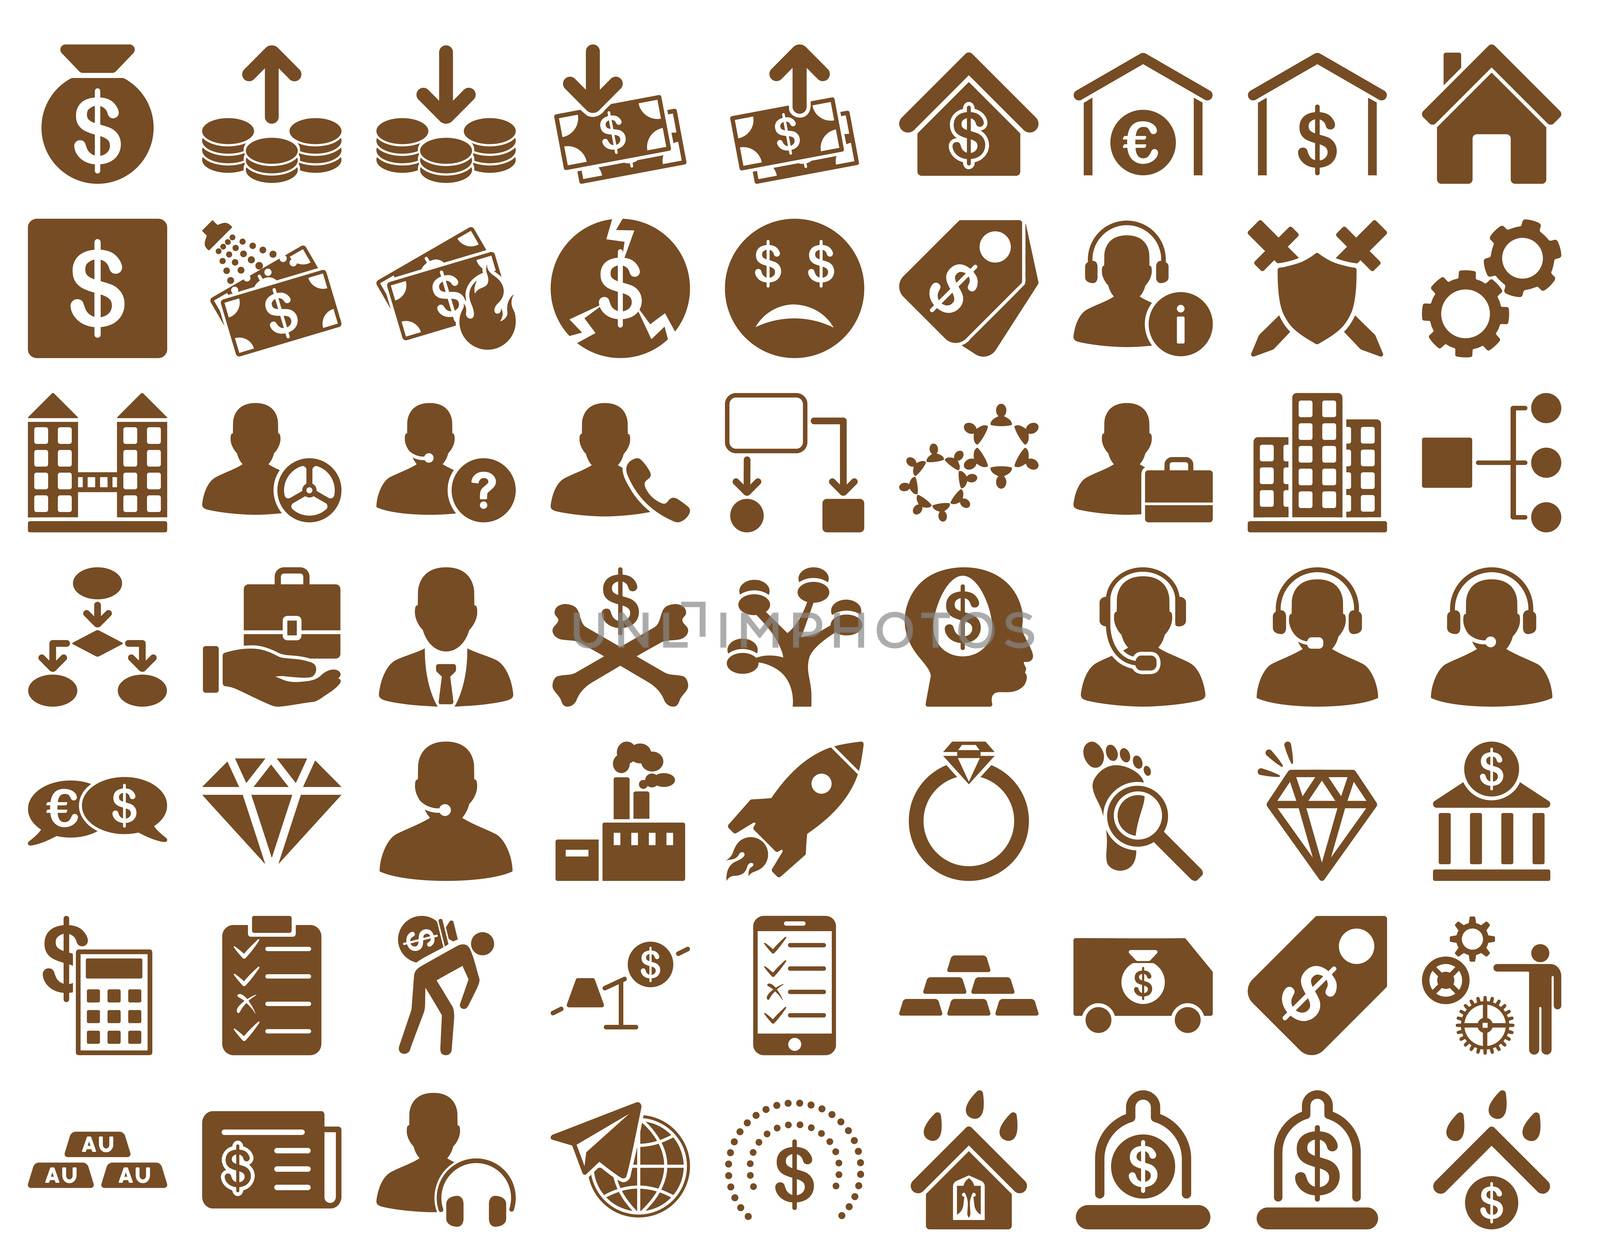 Commerce Icons. These flat icons use brown color. Raster images are isolated on a white background.